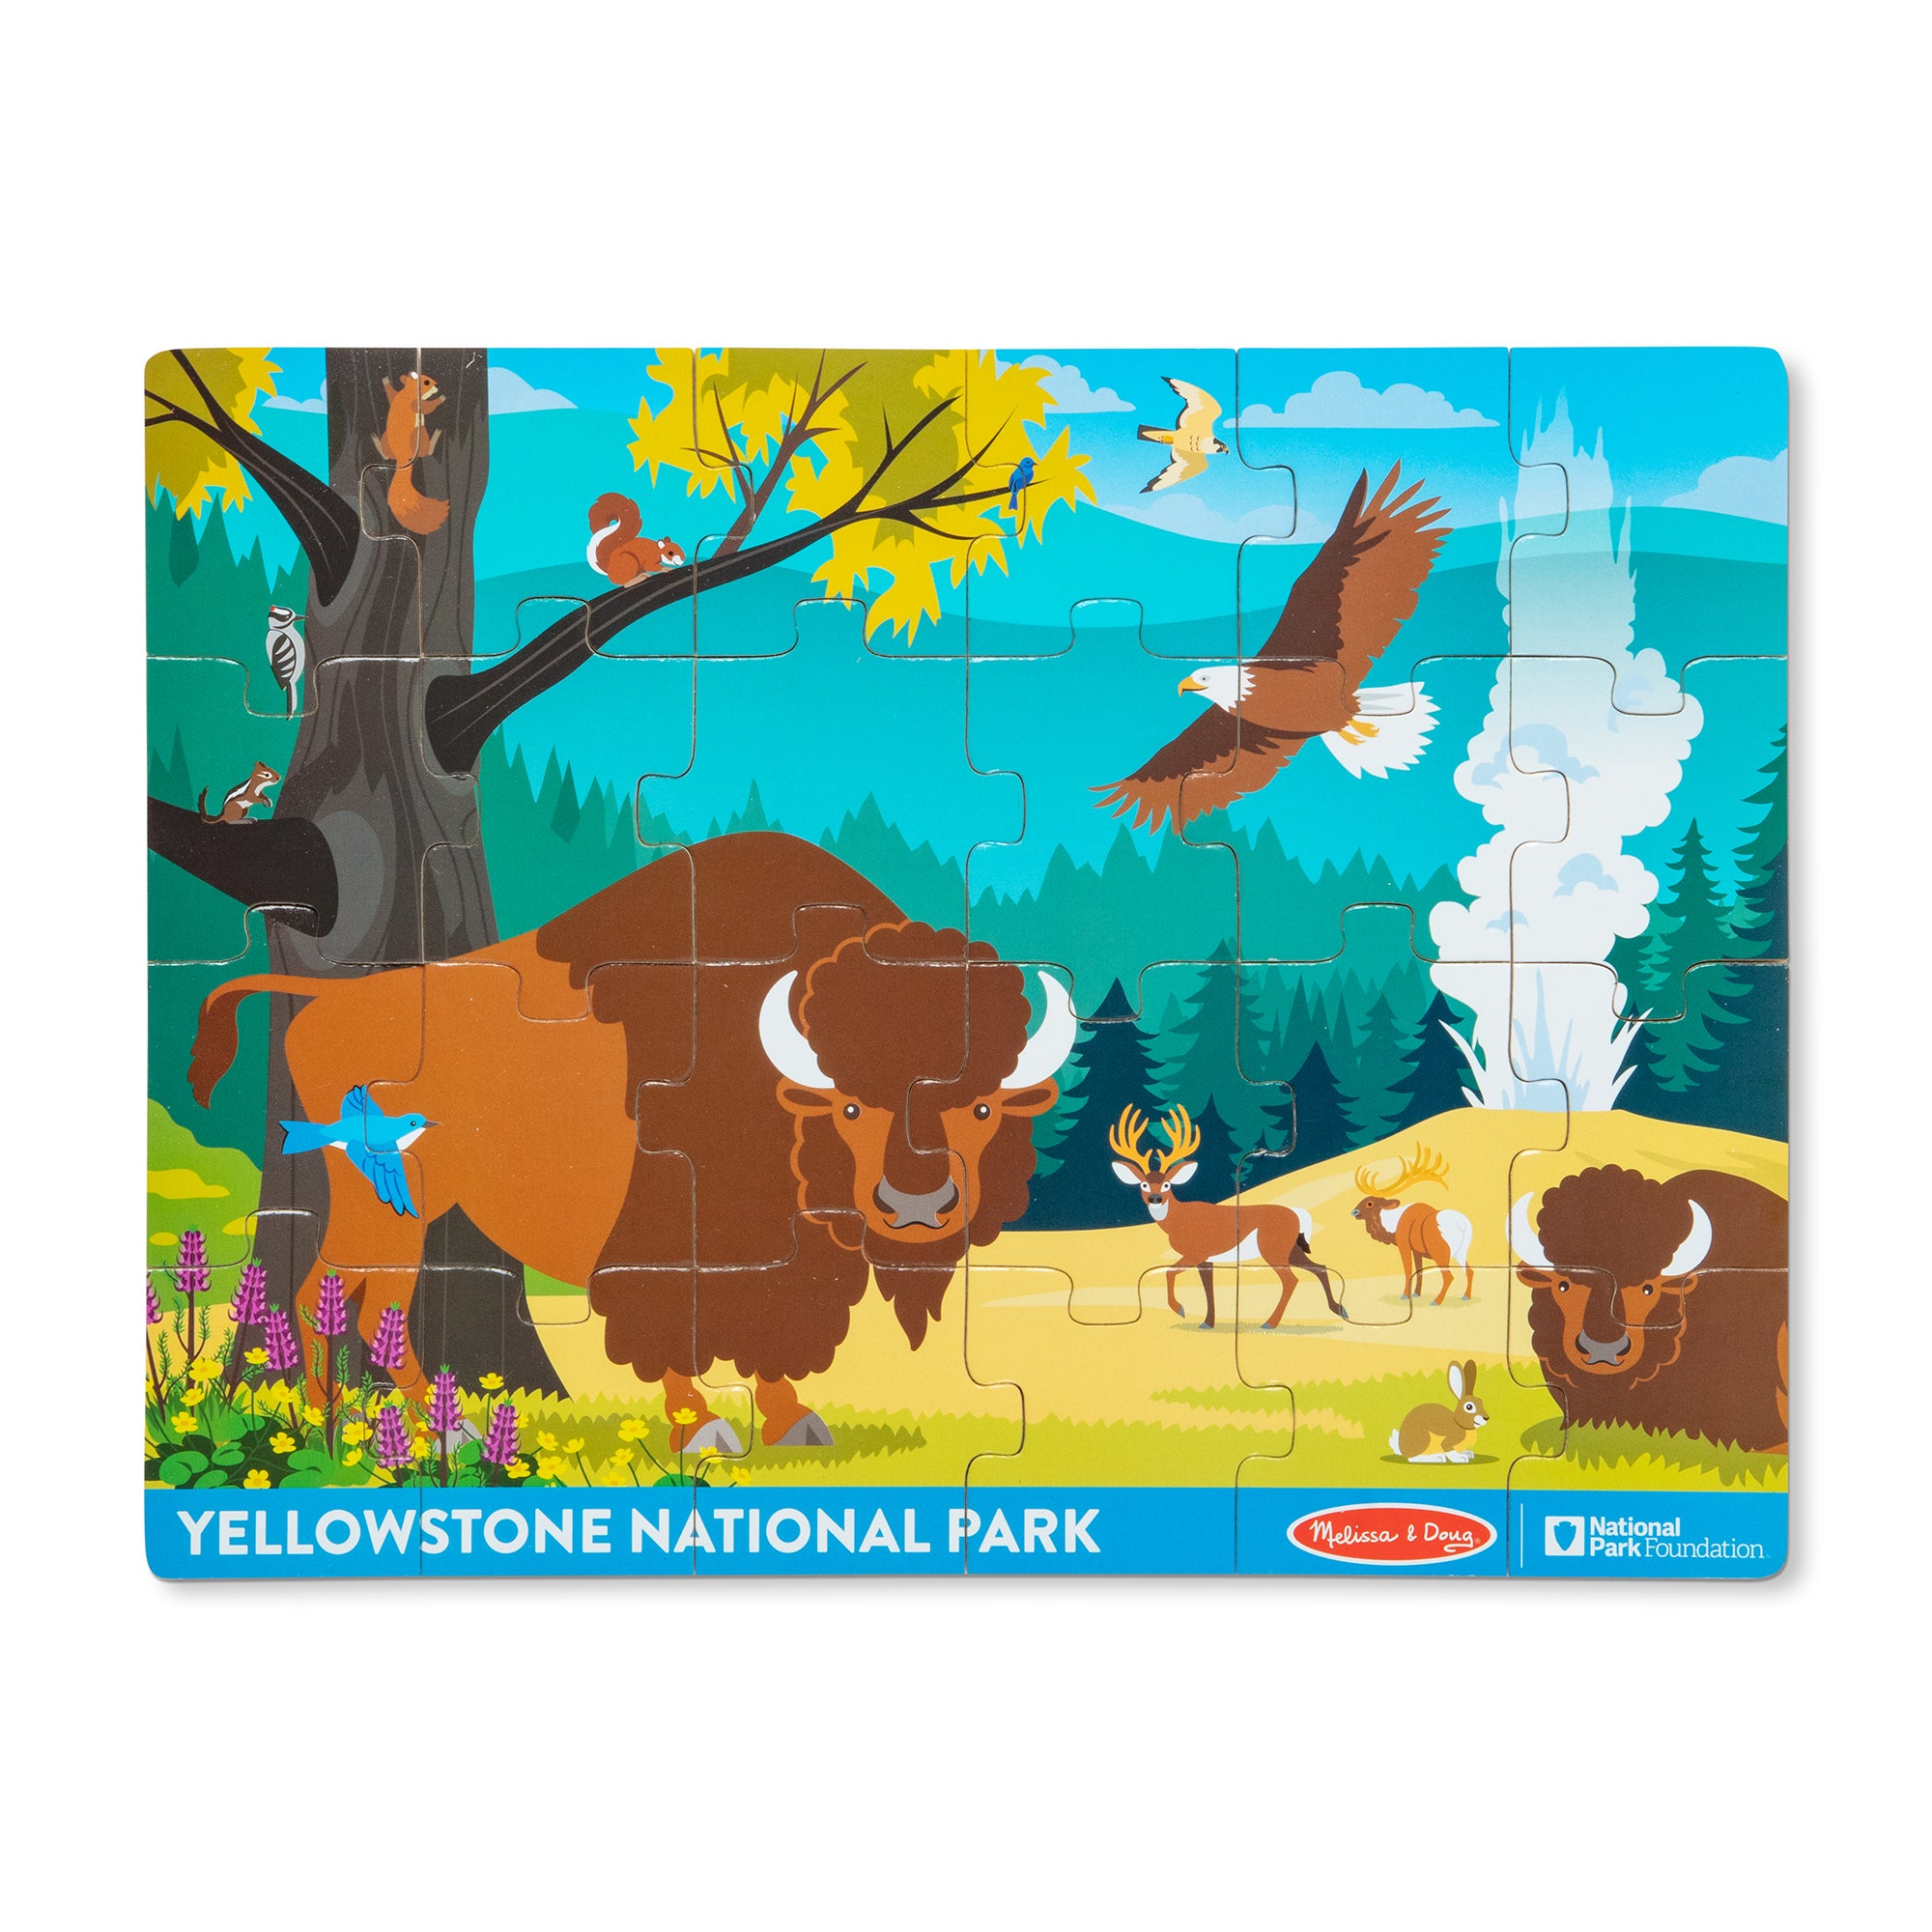 Melissa & Doug Yellowstone National Park Wooden Jigsaw Puzzle - 24 Pieces